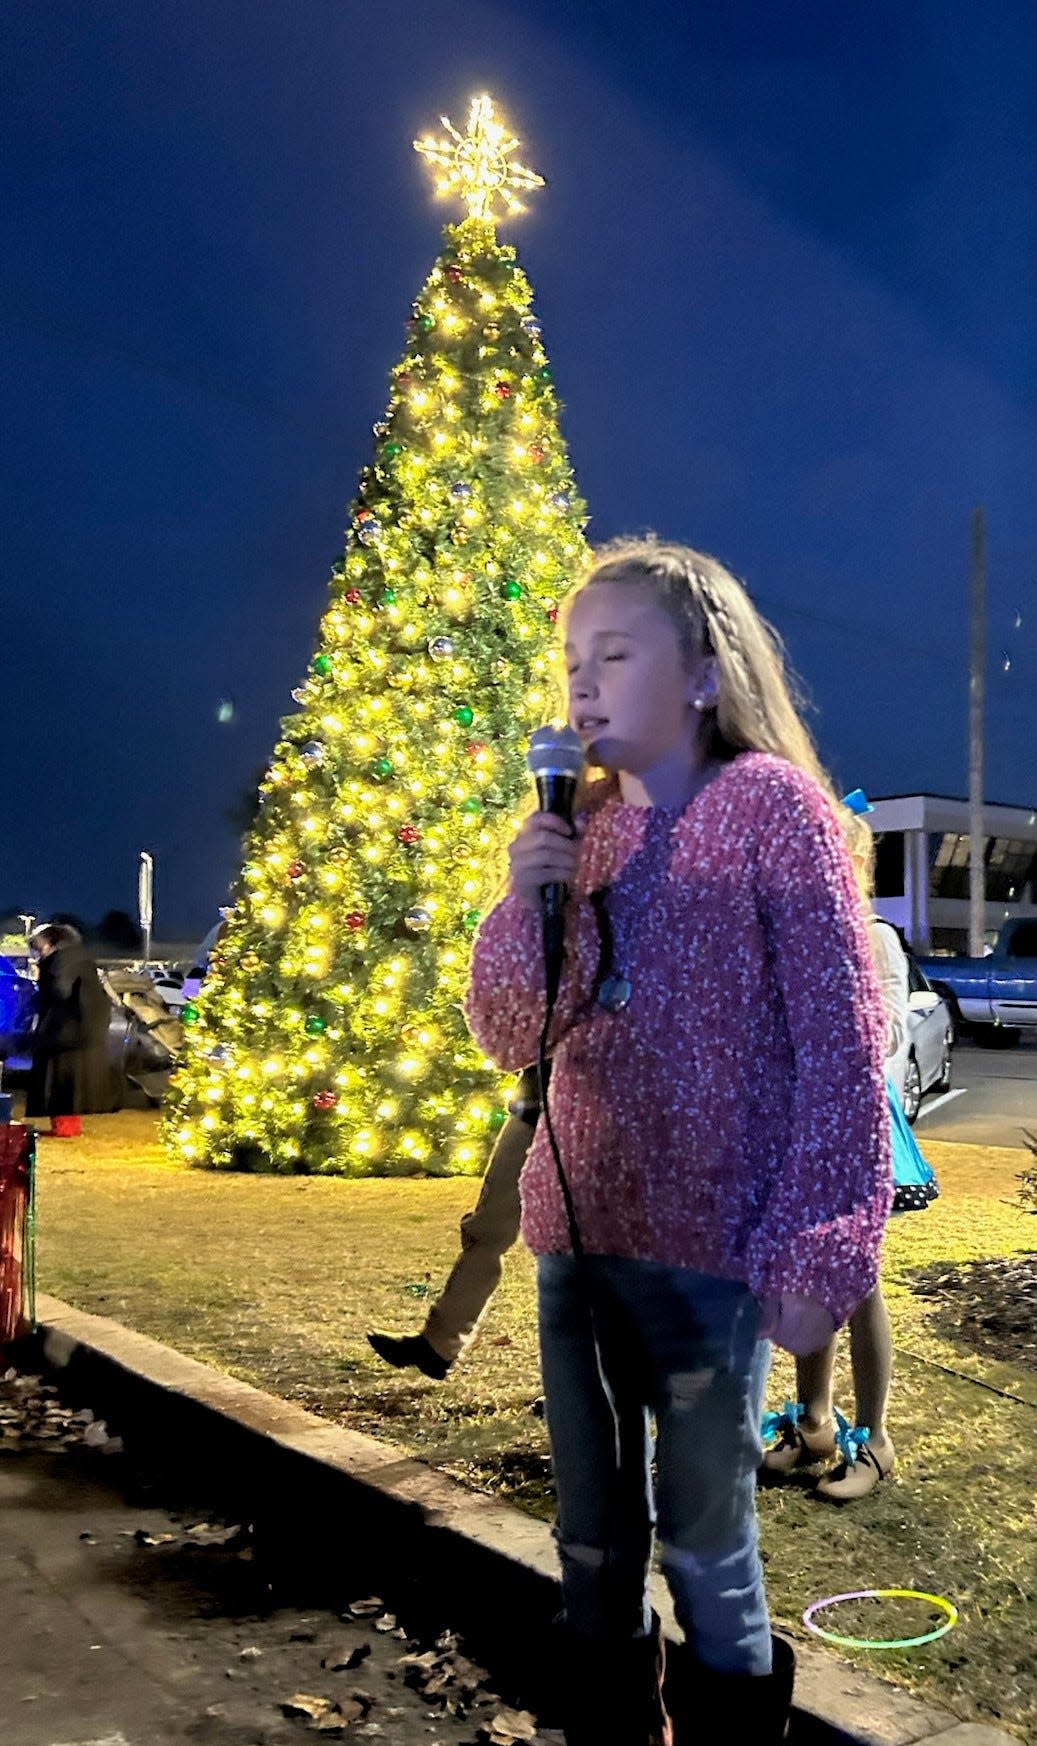 Scenes from the Wrens Christmas Tree lighting.